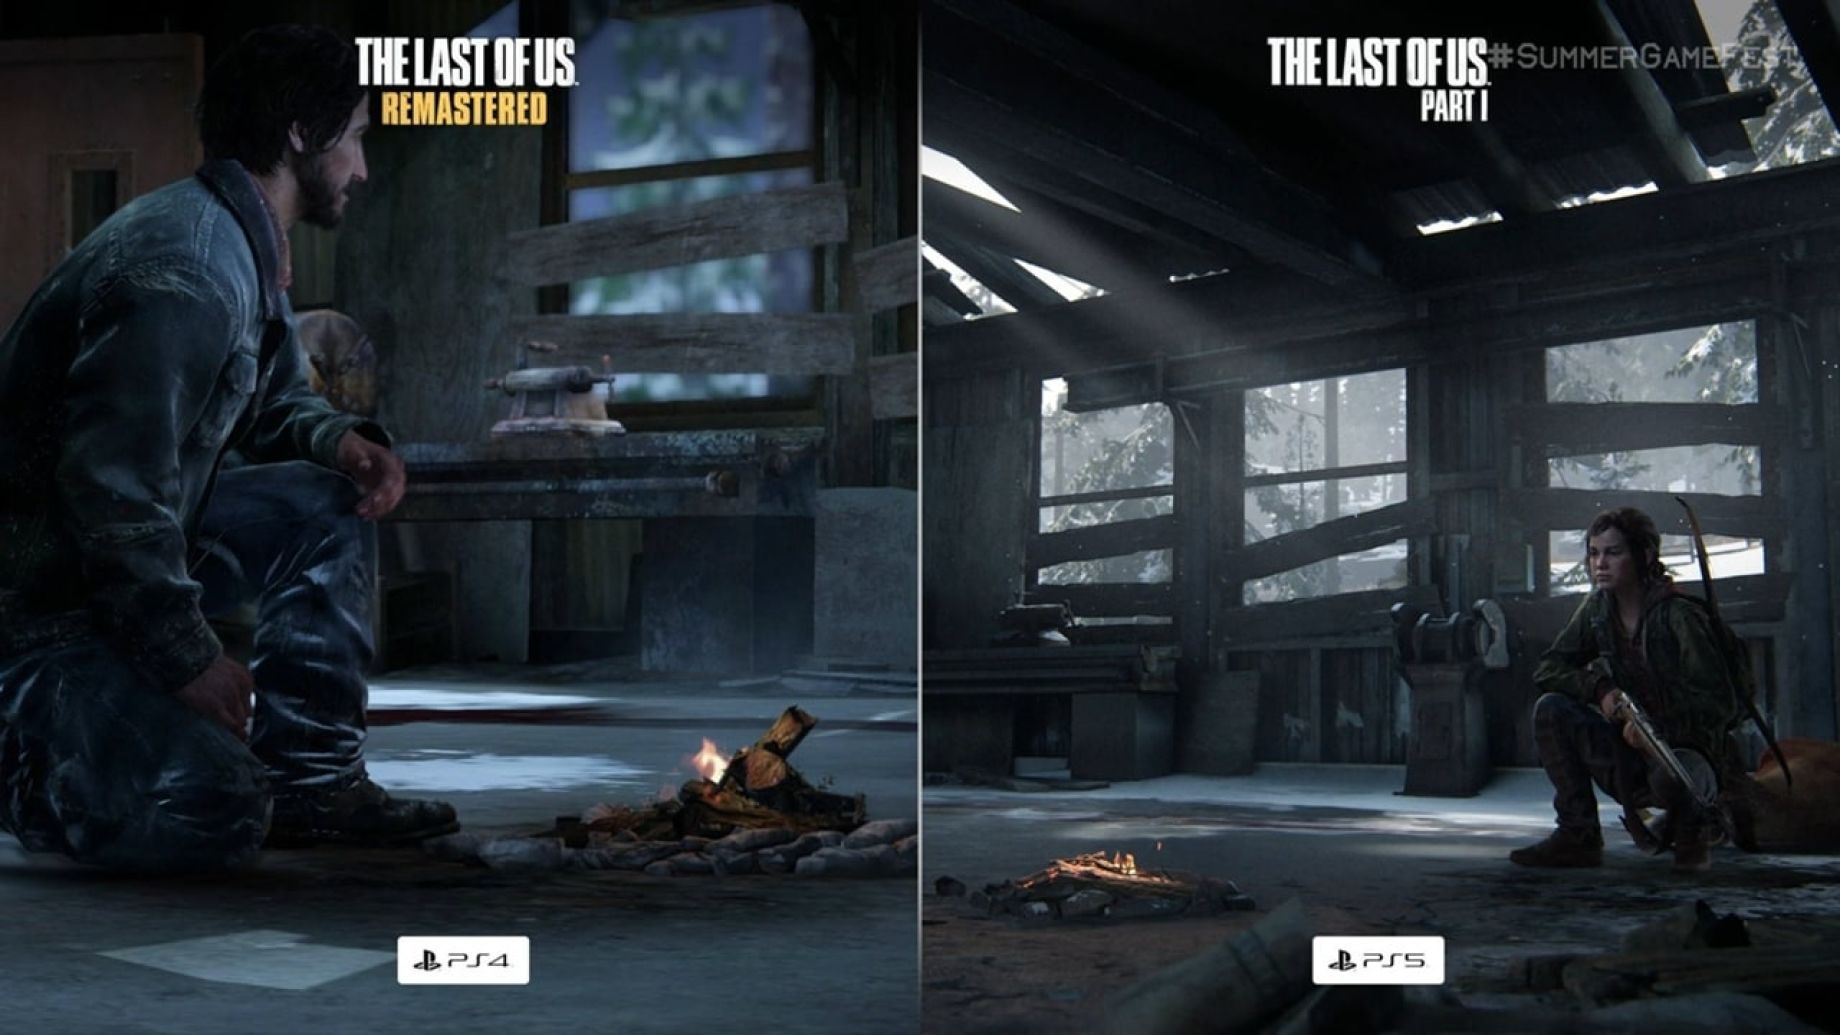 The Last of Us (PS3) Vs The Last of Us Remastered (PS4) Vs The